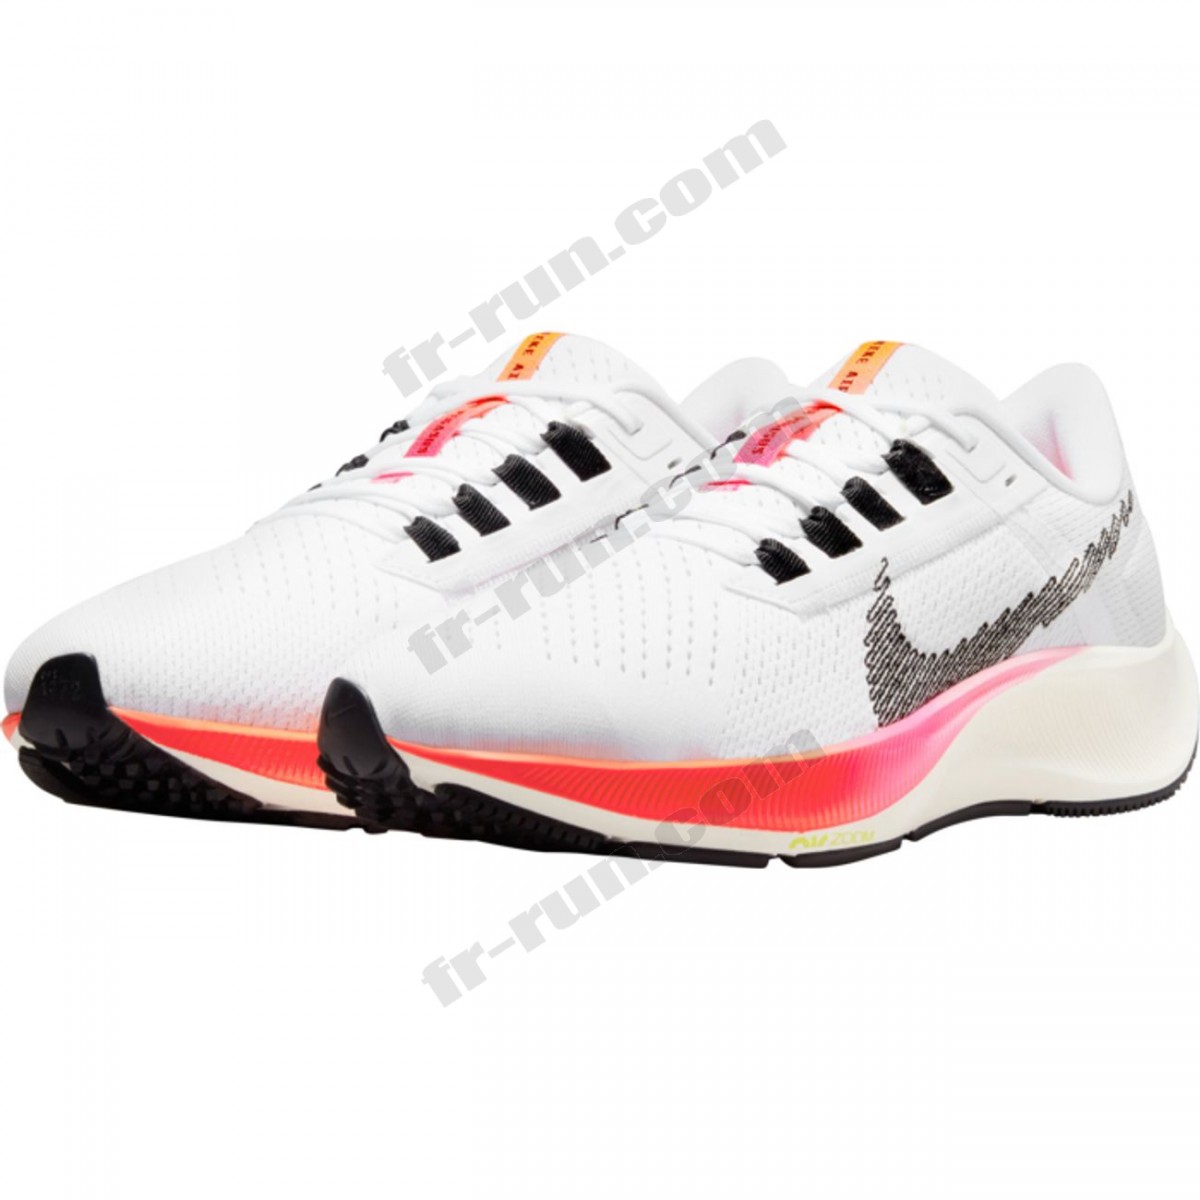 Nike/CHAUSSURES BASSES running femme NIKE W NIKE AIR ZOOM PEGASUS 38 T √ Nouveau style √ Soldes - -2